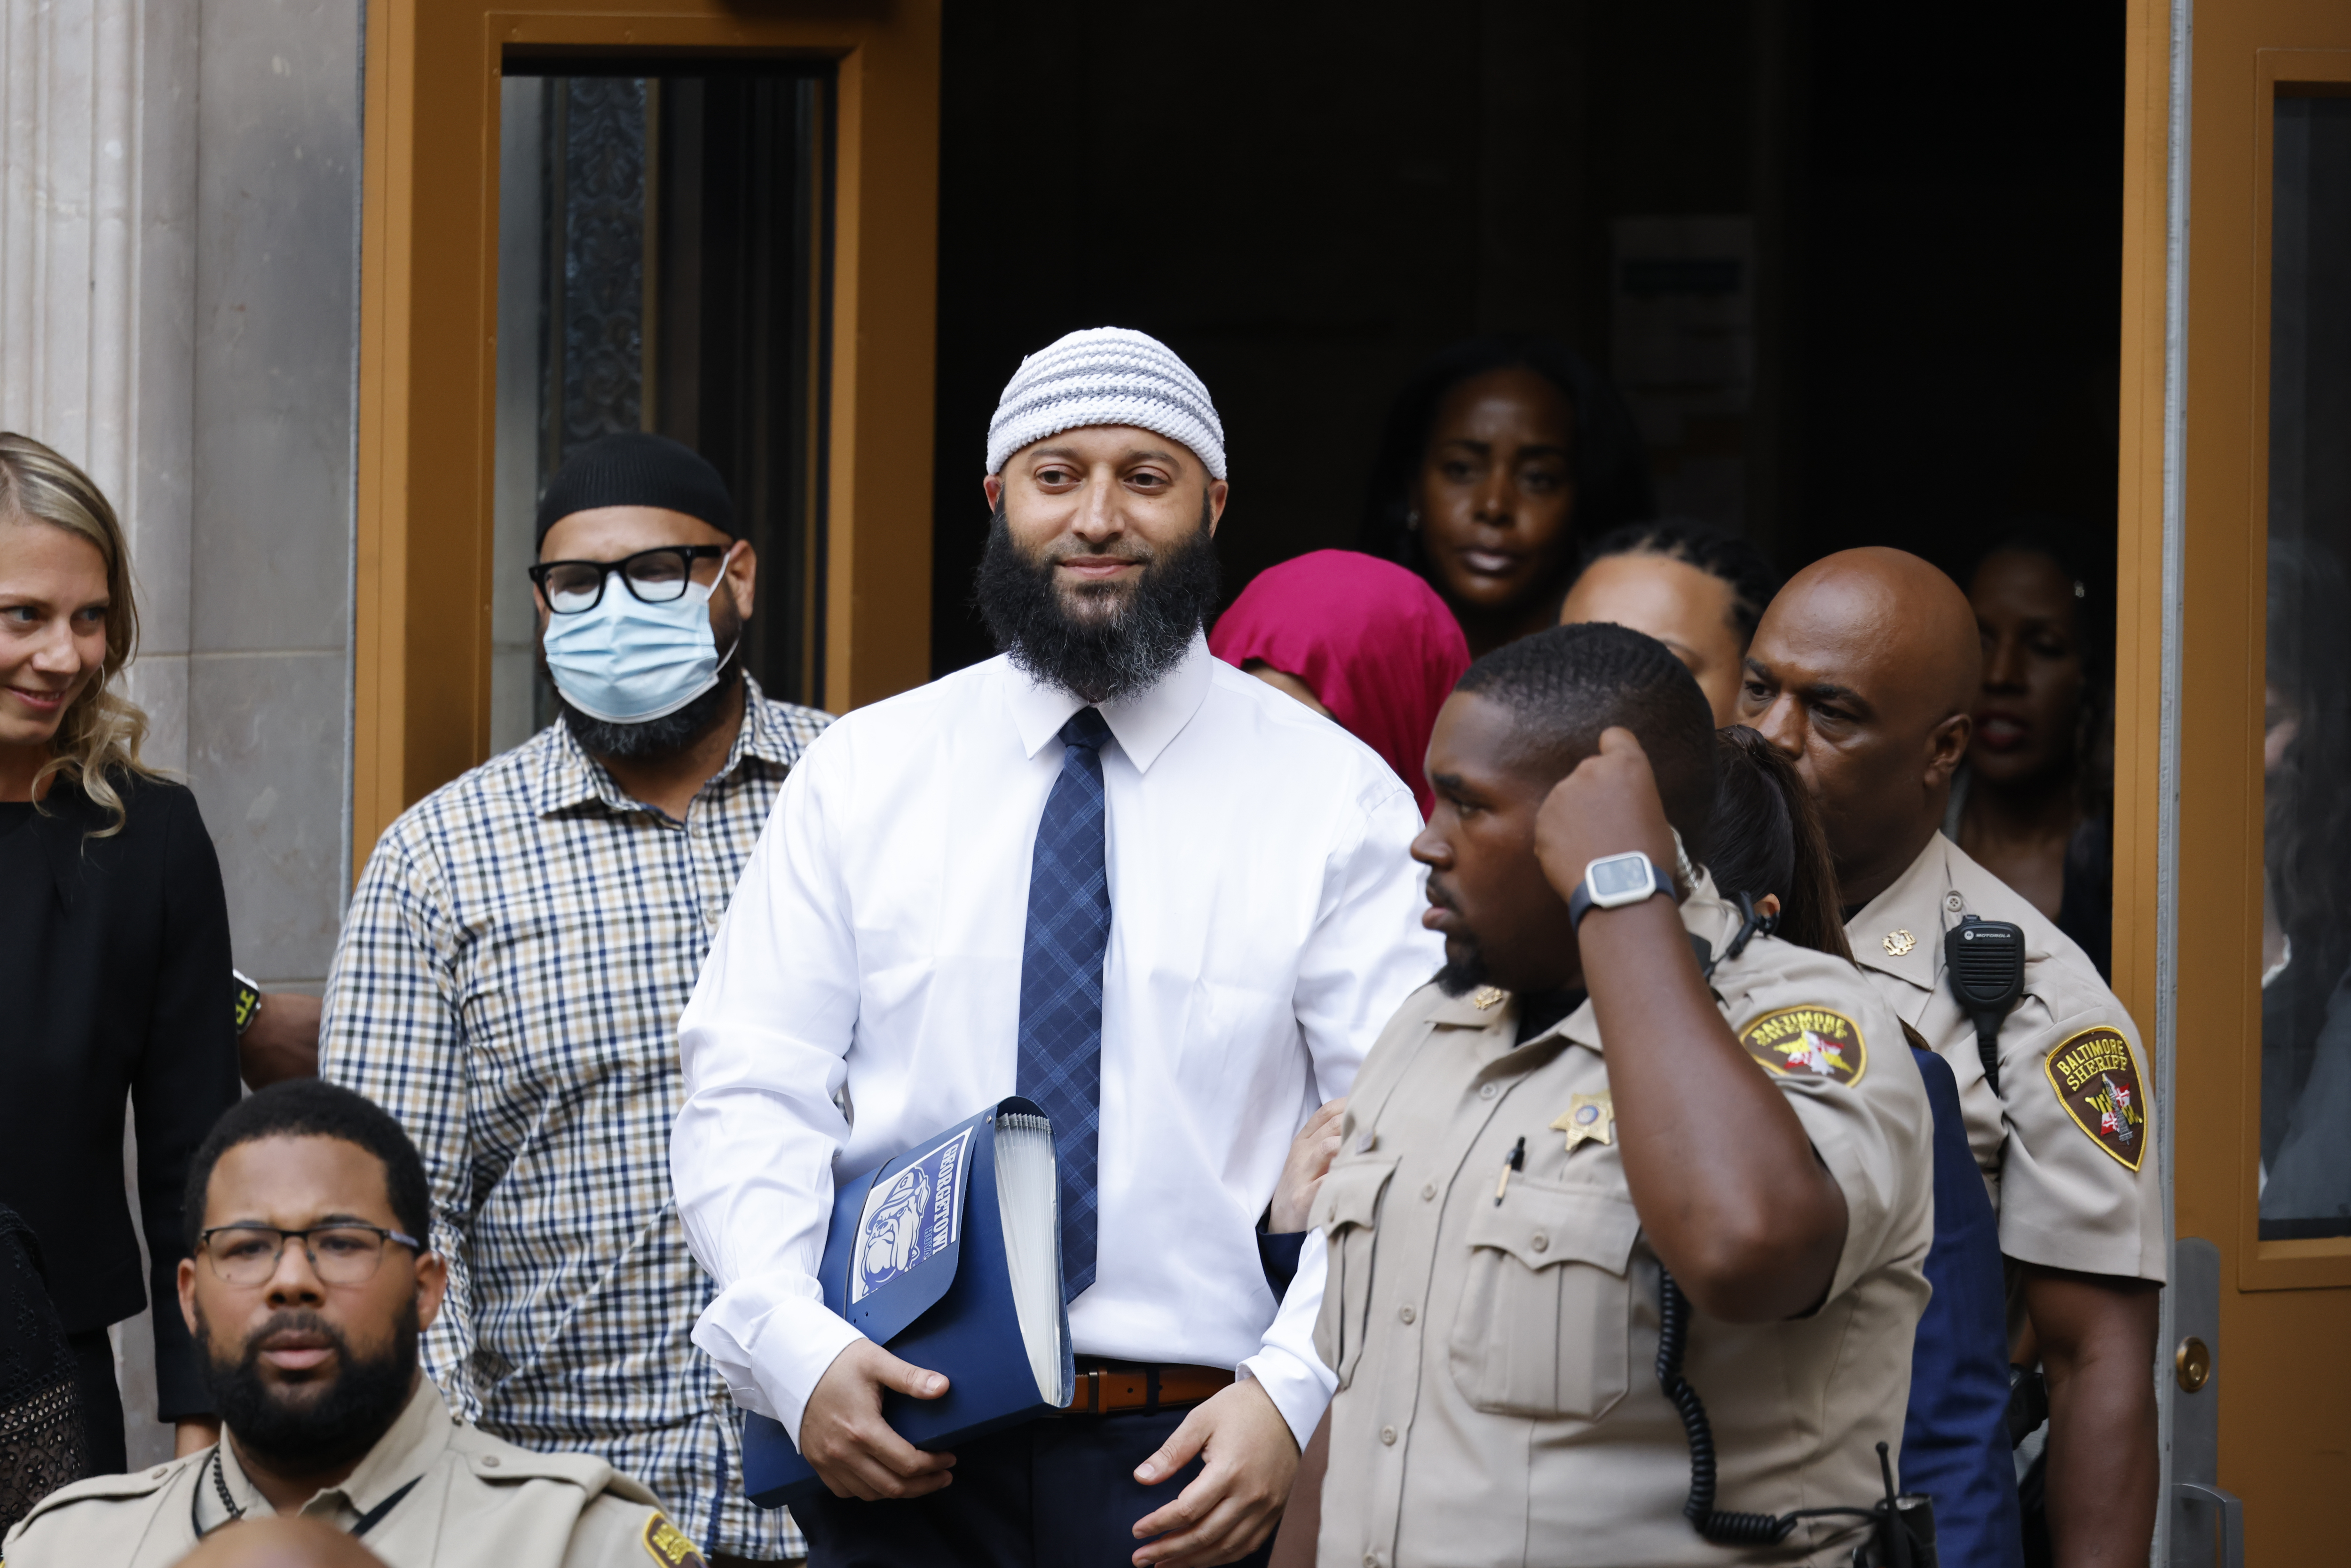 Adnan Syed, subject of 'Serial' podcast, to be released, conviction tossed  - The Boston Globe